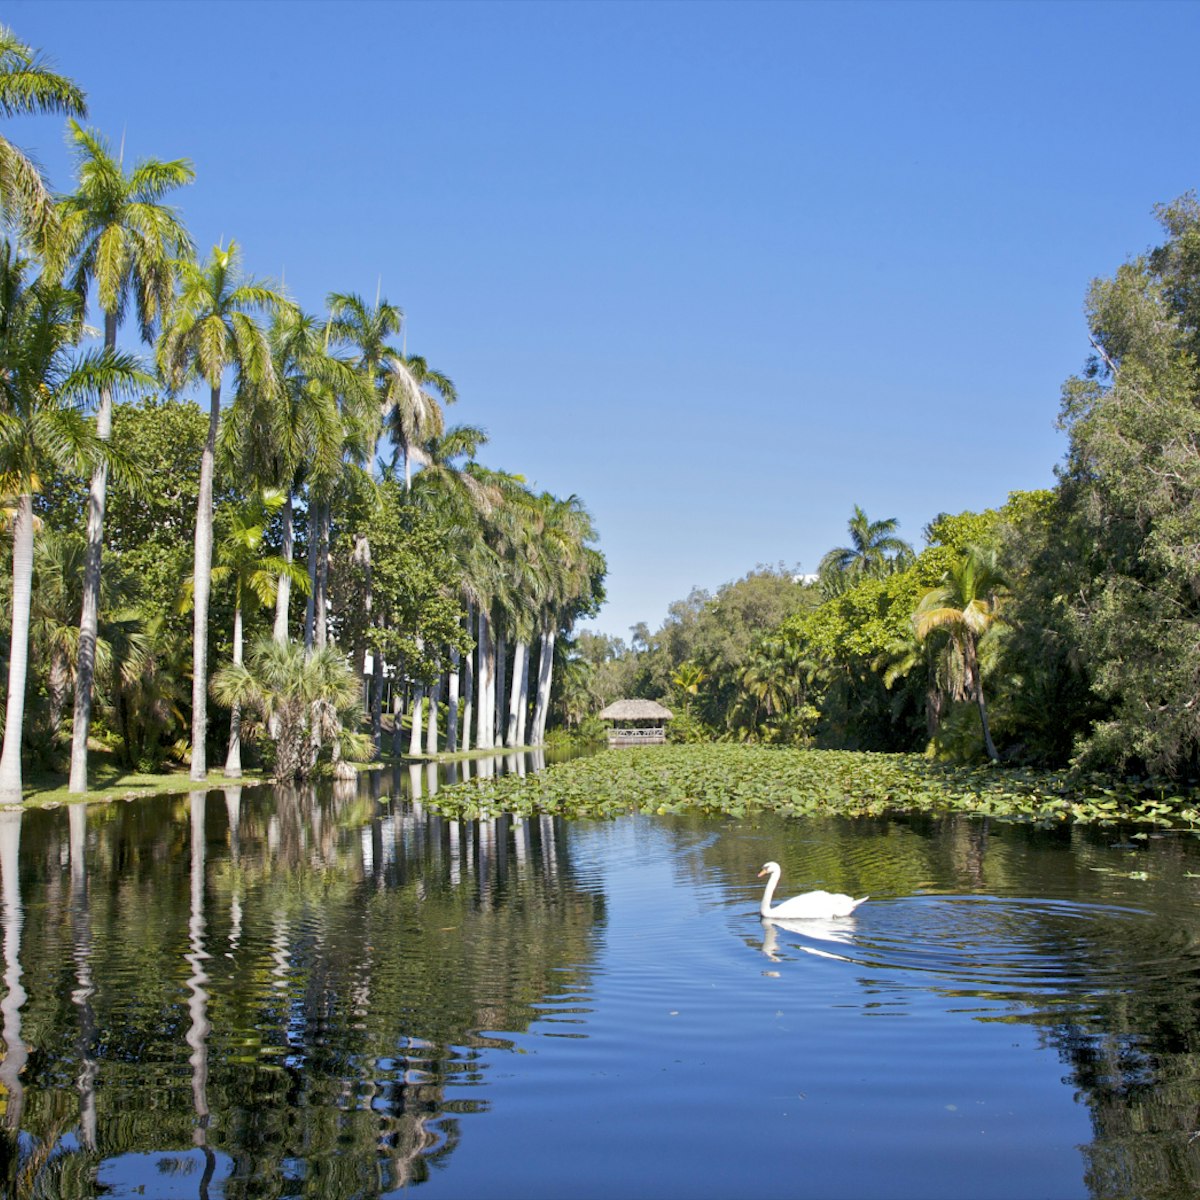 Calm waters with white swan near palms.